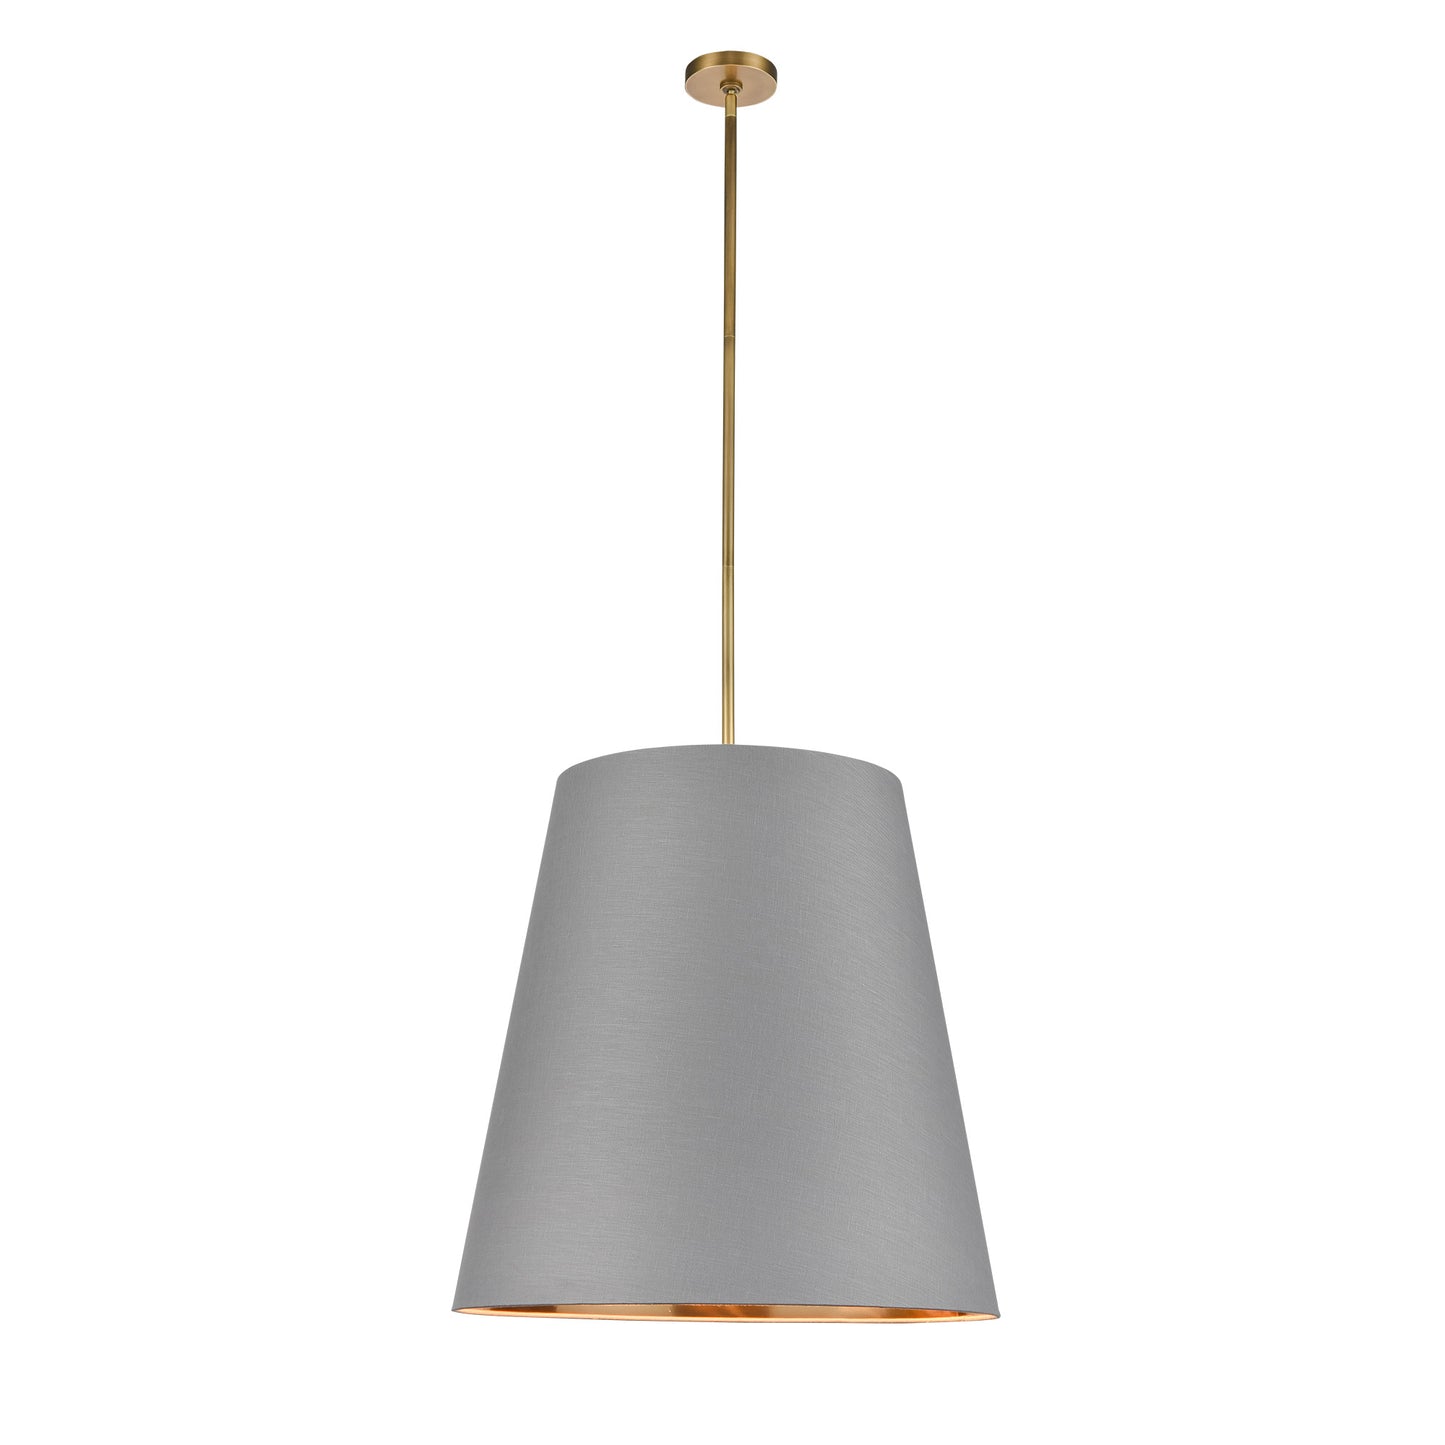 PD311025VBGG Calor 3 Light 25-1/2" Vintage Brass With Gray Linen And Gold Parchment Shade Pendant